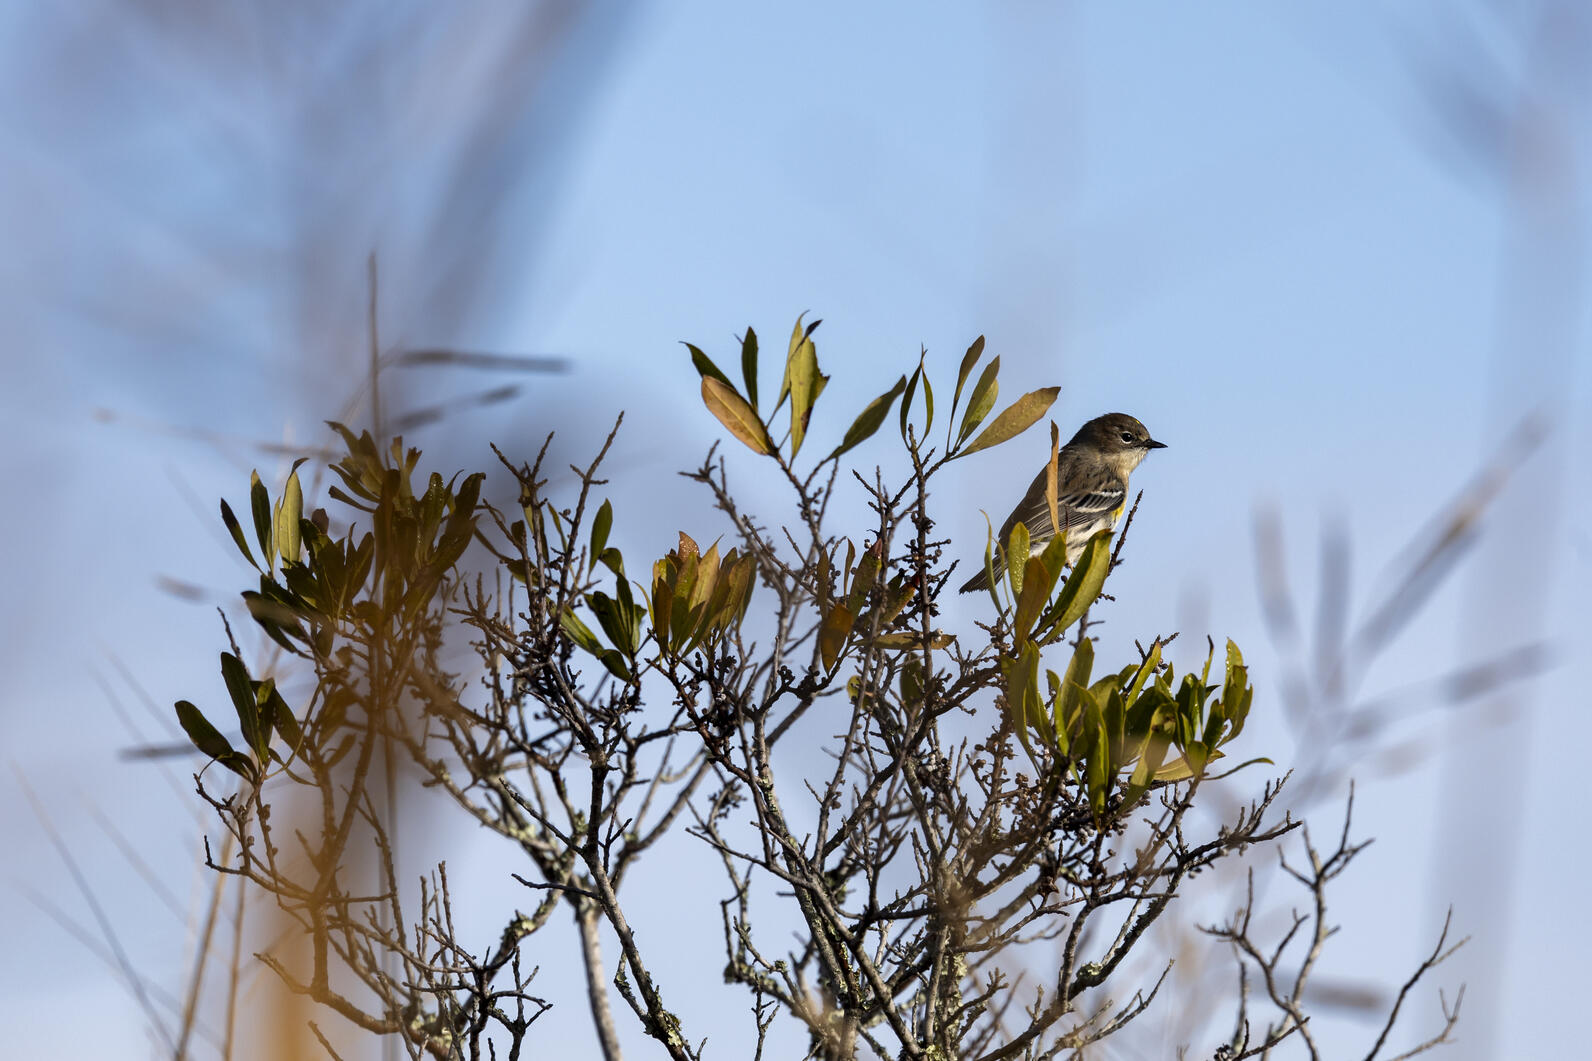 Yellow-Rumped Warbler perched in a tree